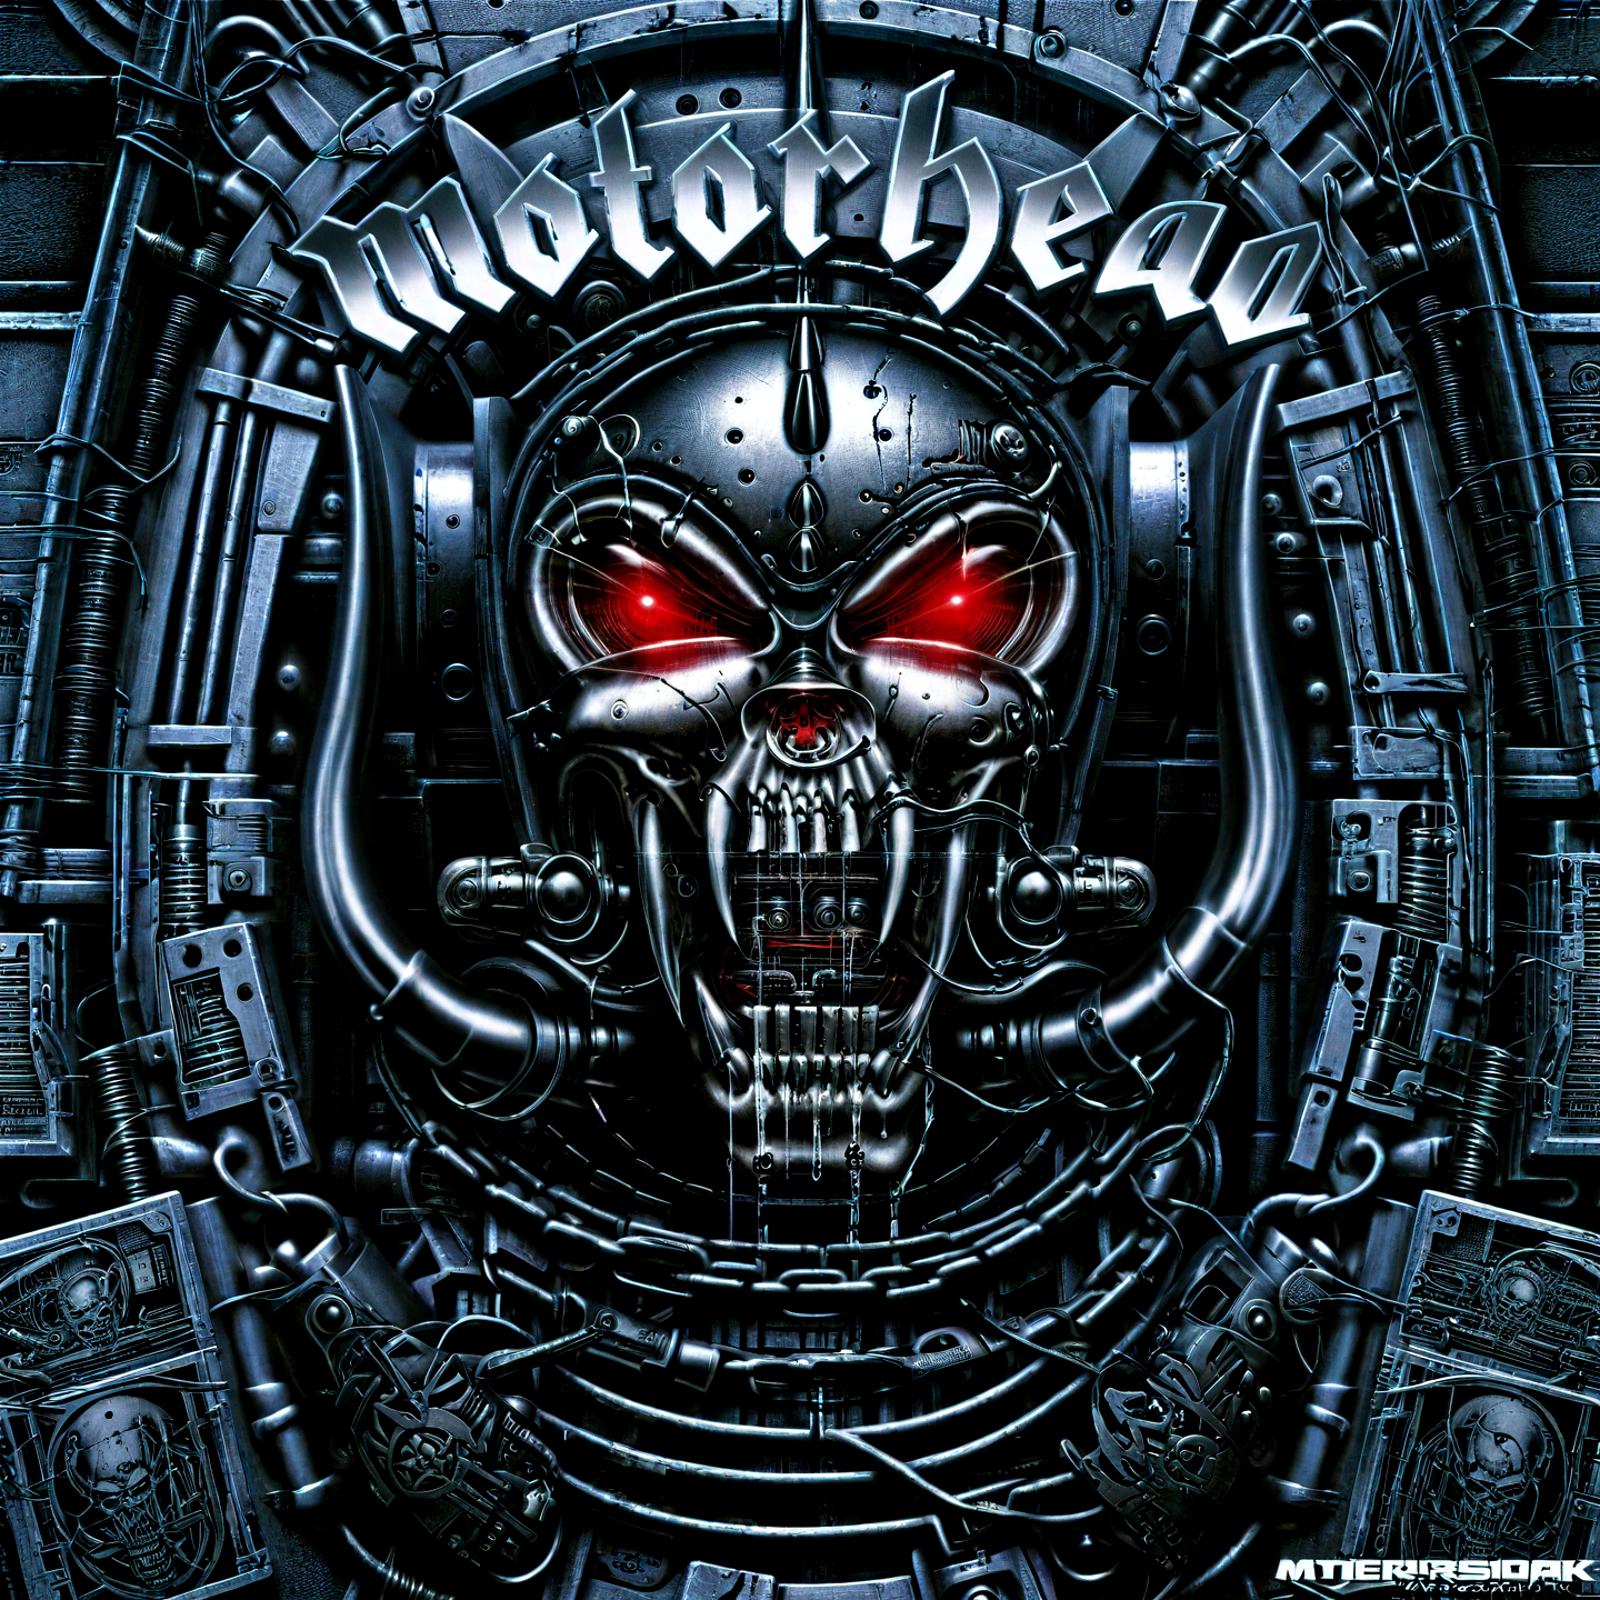 Motörhead Record Cover [SDXL] image by denrakeiw